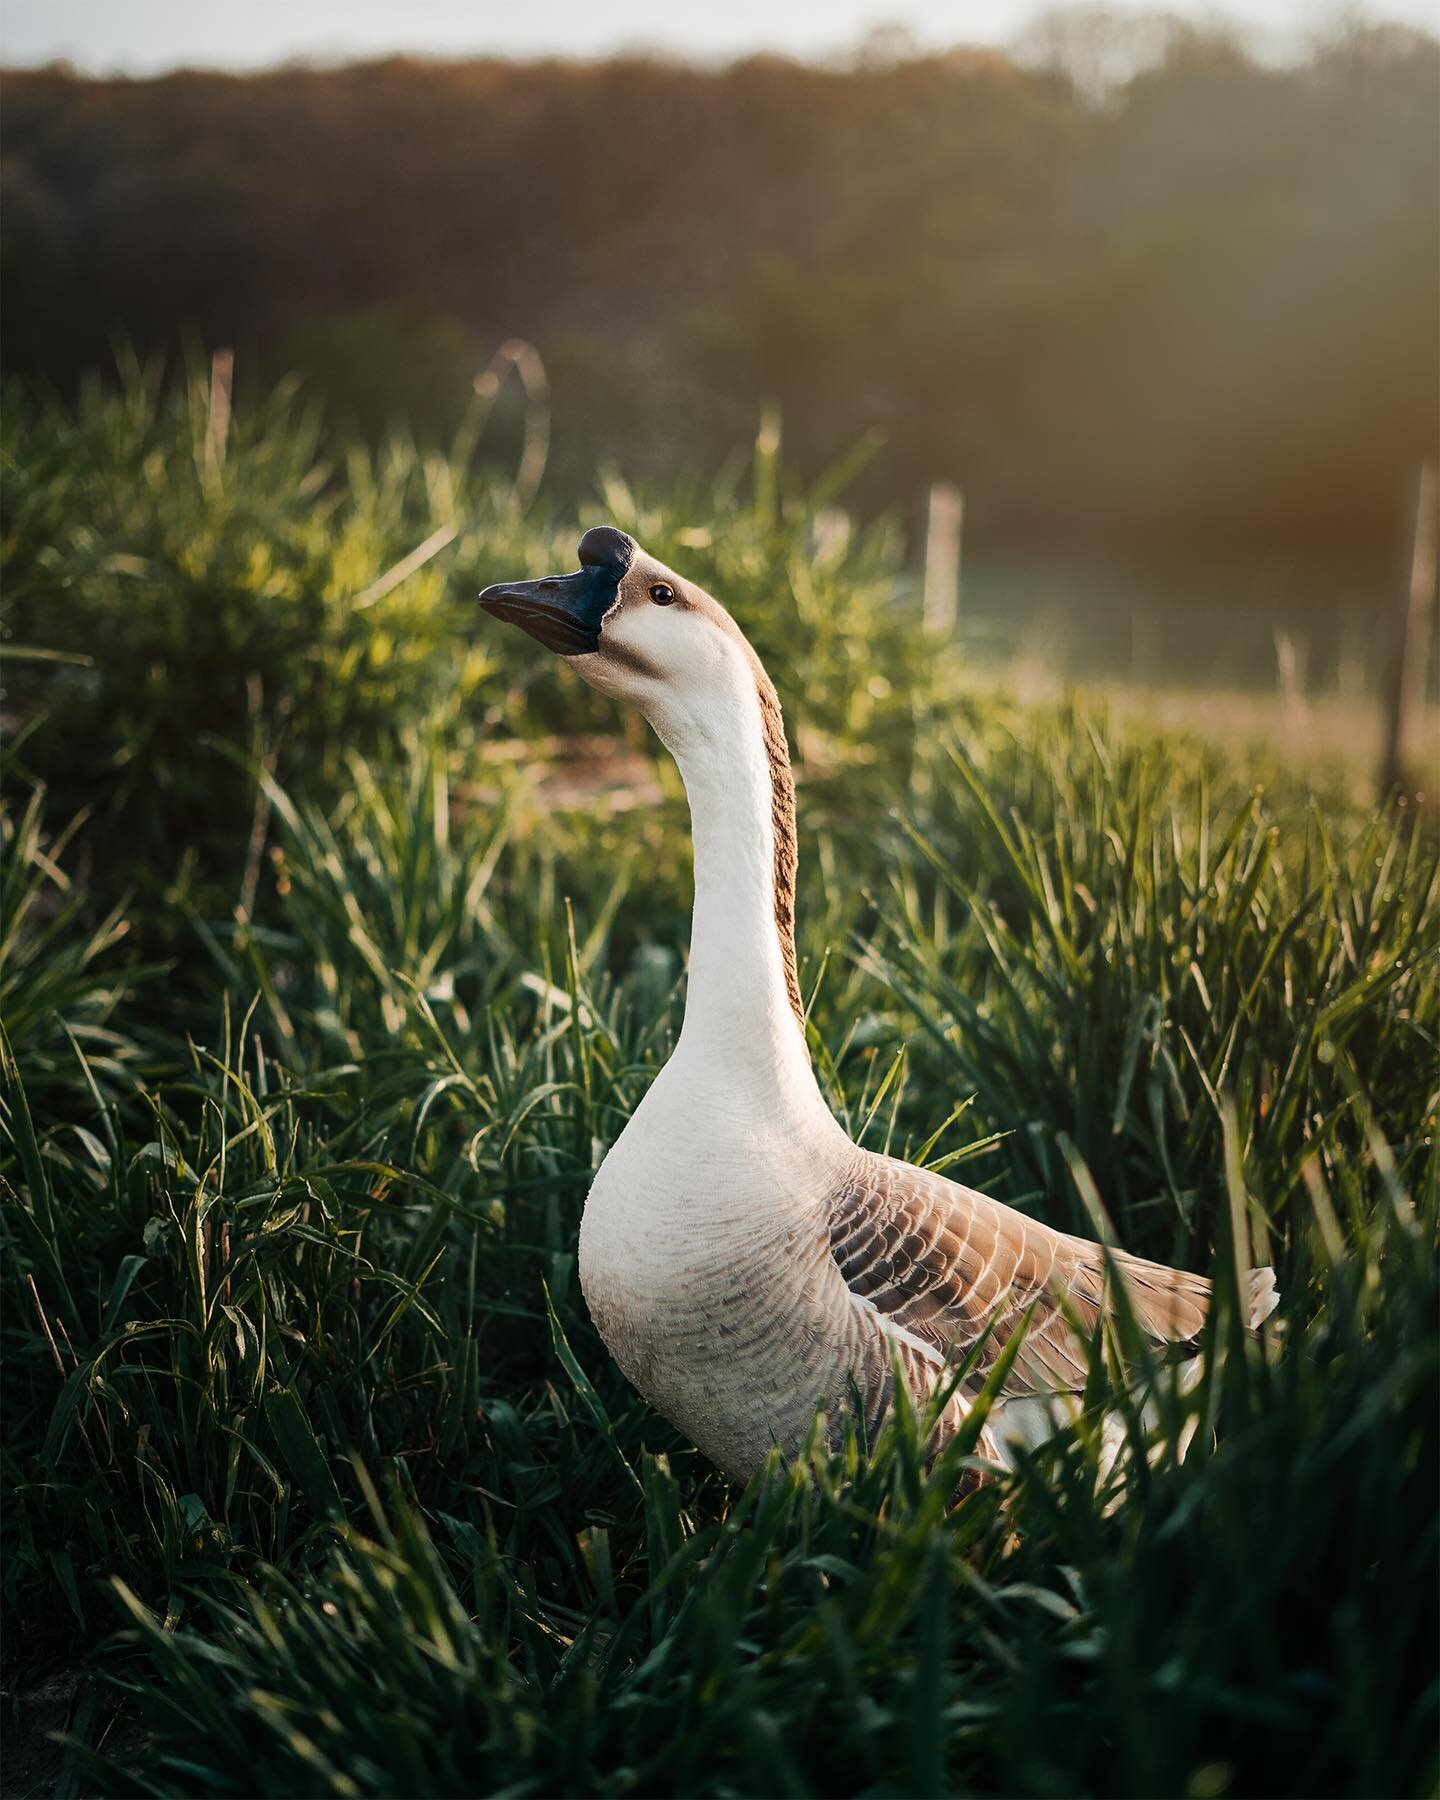 Brown Chinese Geese&hellip;

These guys have been a popular topic around here lately&hellip;thanks to a recent reel where I talk about using them to keep my chickens safe. 

Some people had concerns about aggressiveness (towards both people and small